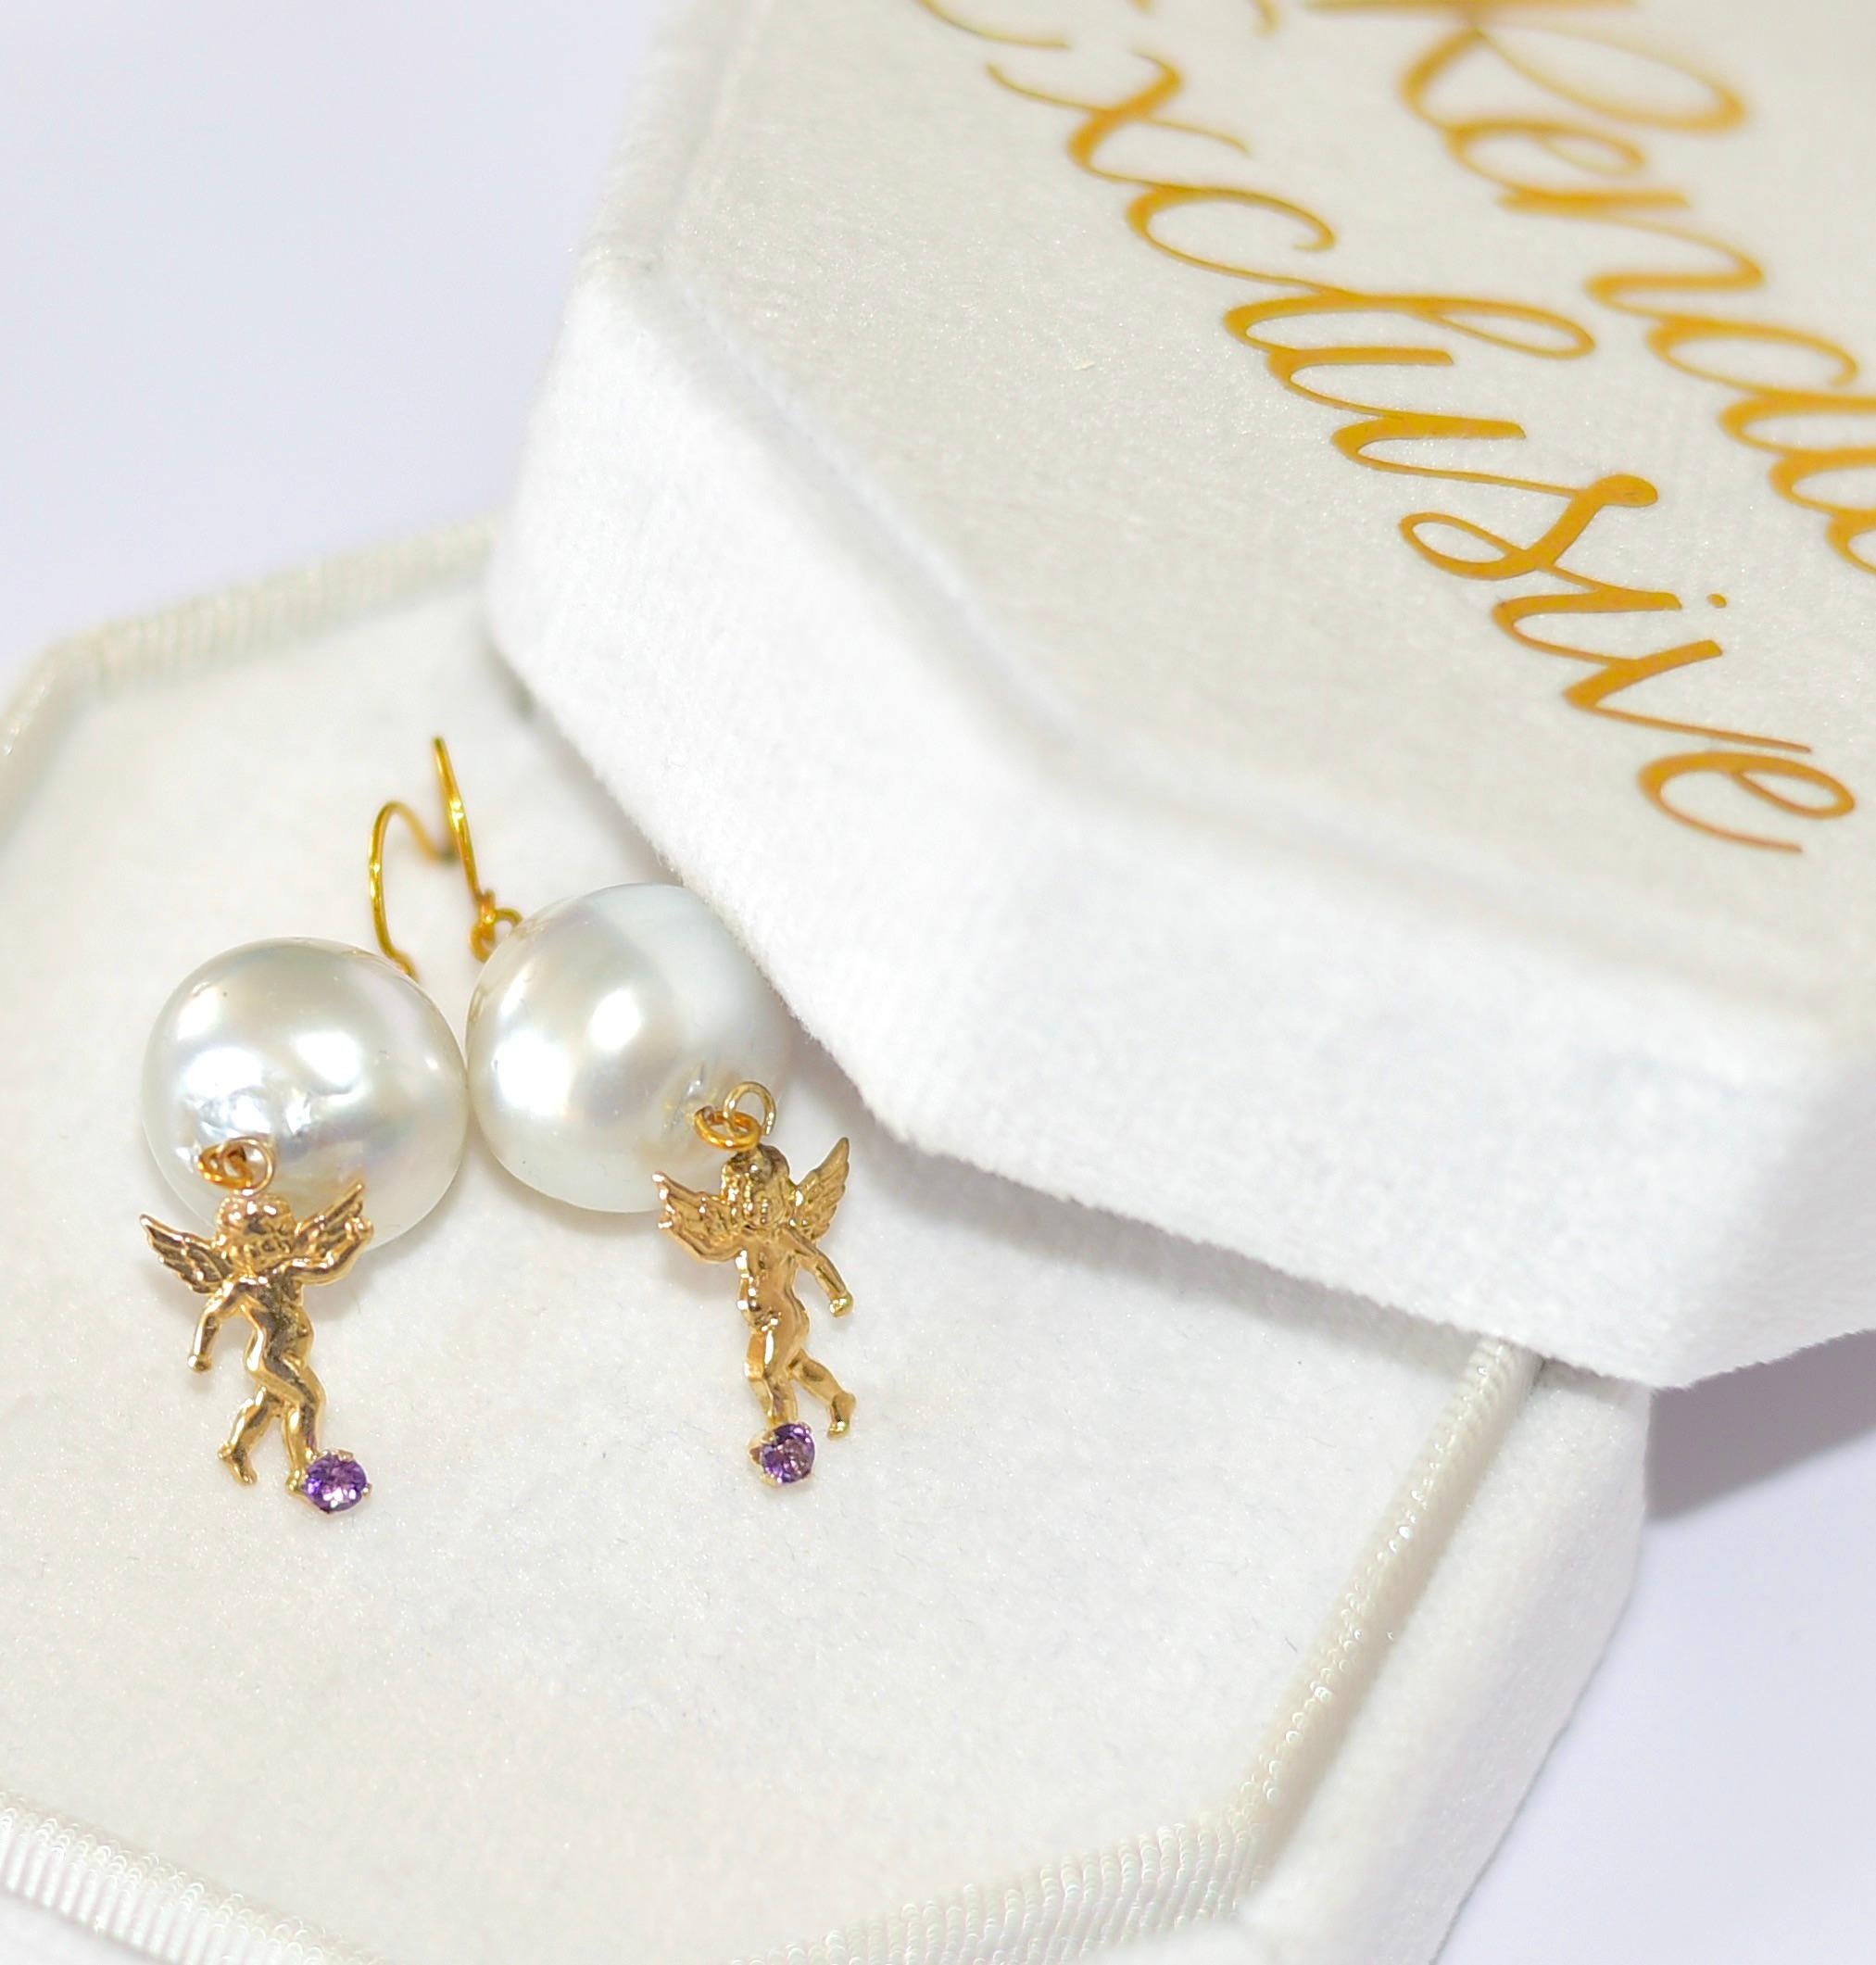 Australian Paspaley Cultured Pearl earrings, 14K Yellow Gold Angel with Amethyst 2